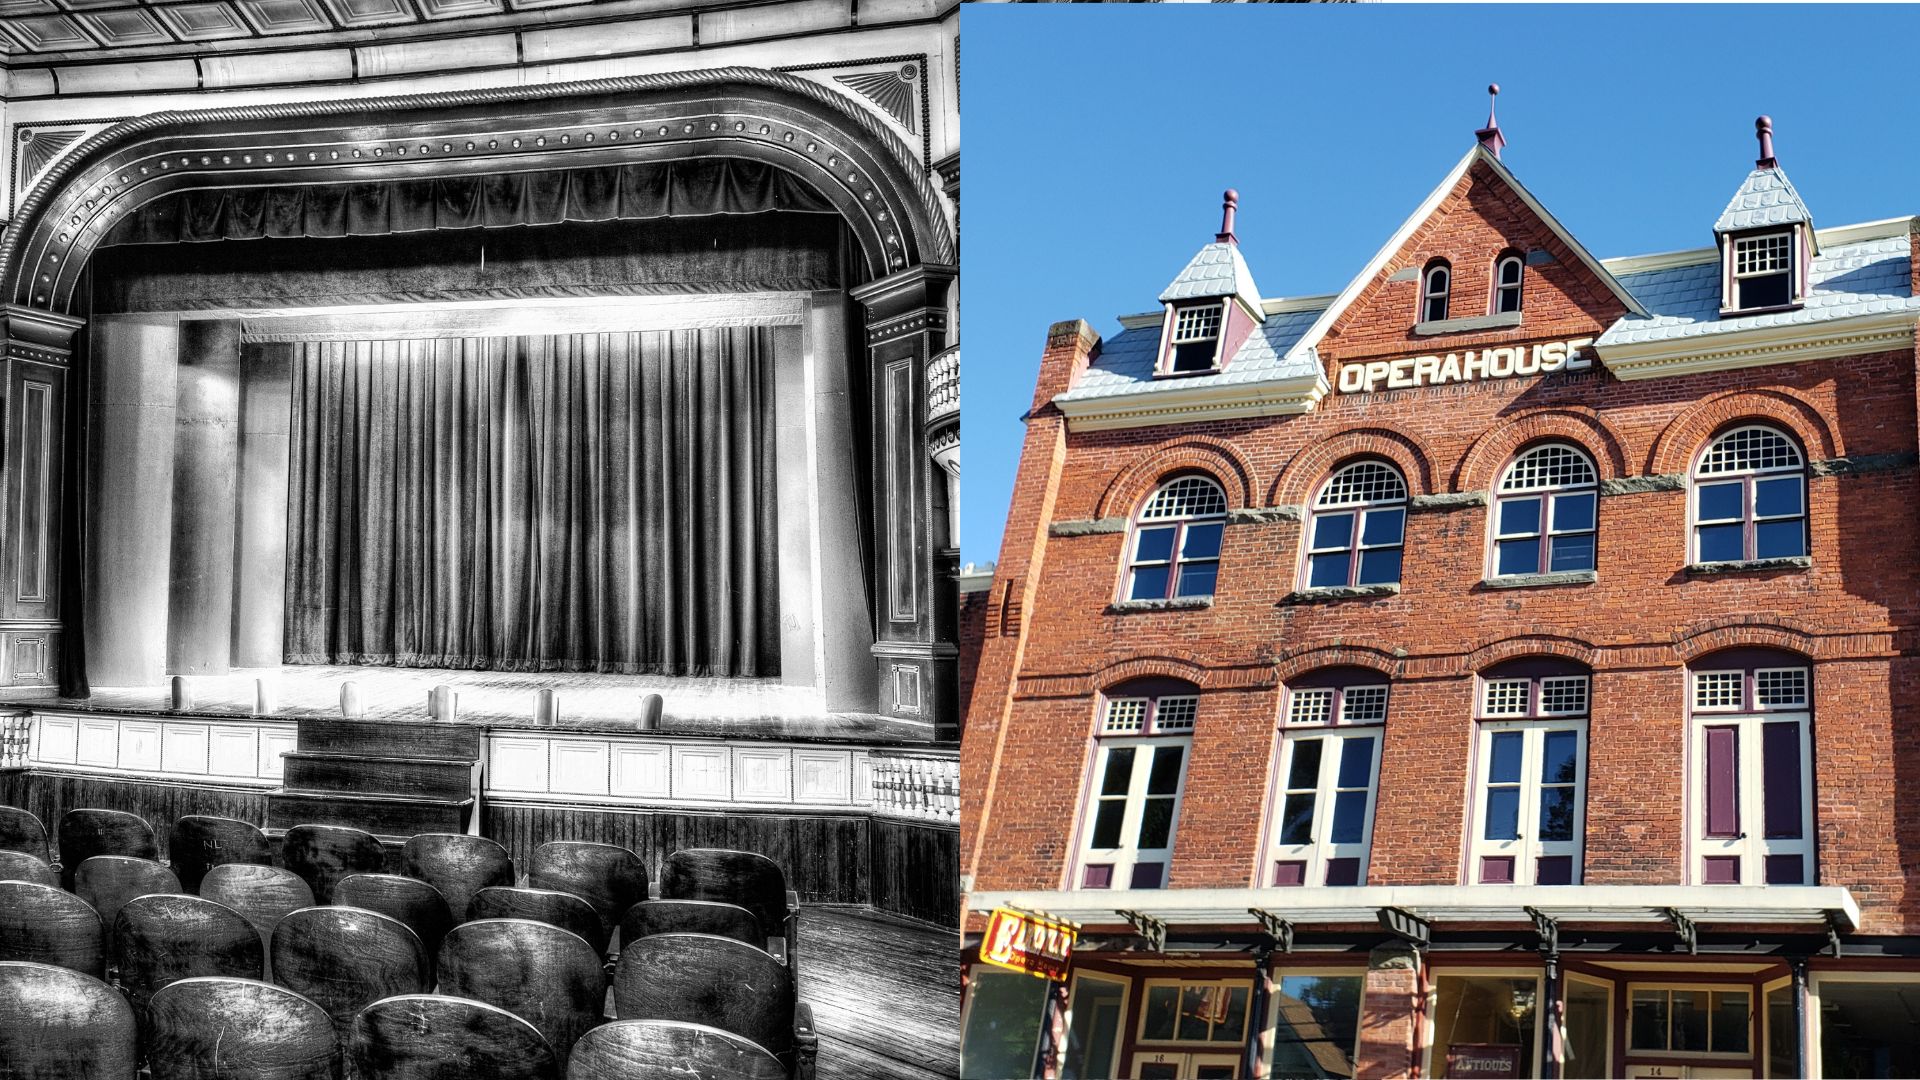 The Earlville Opera House Then and Now